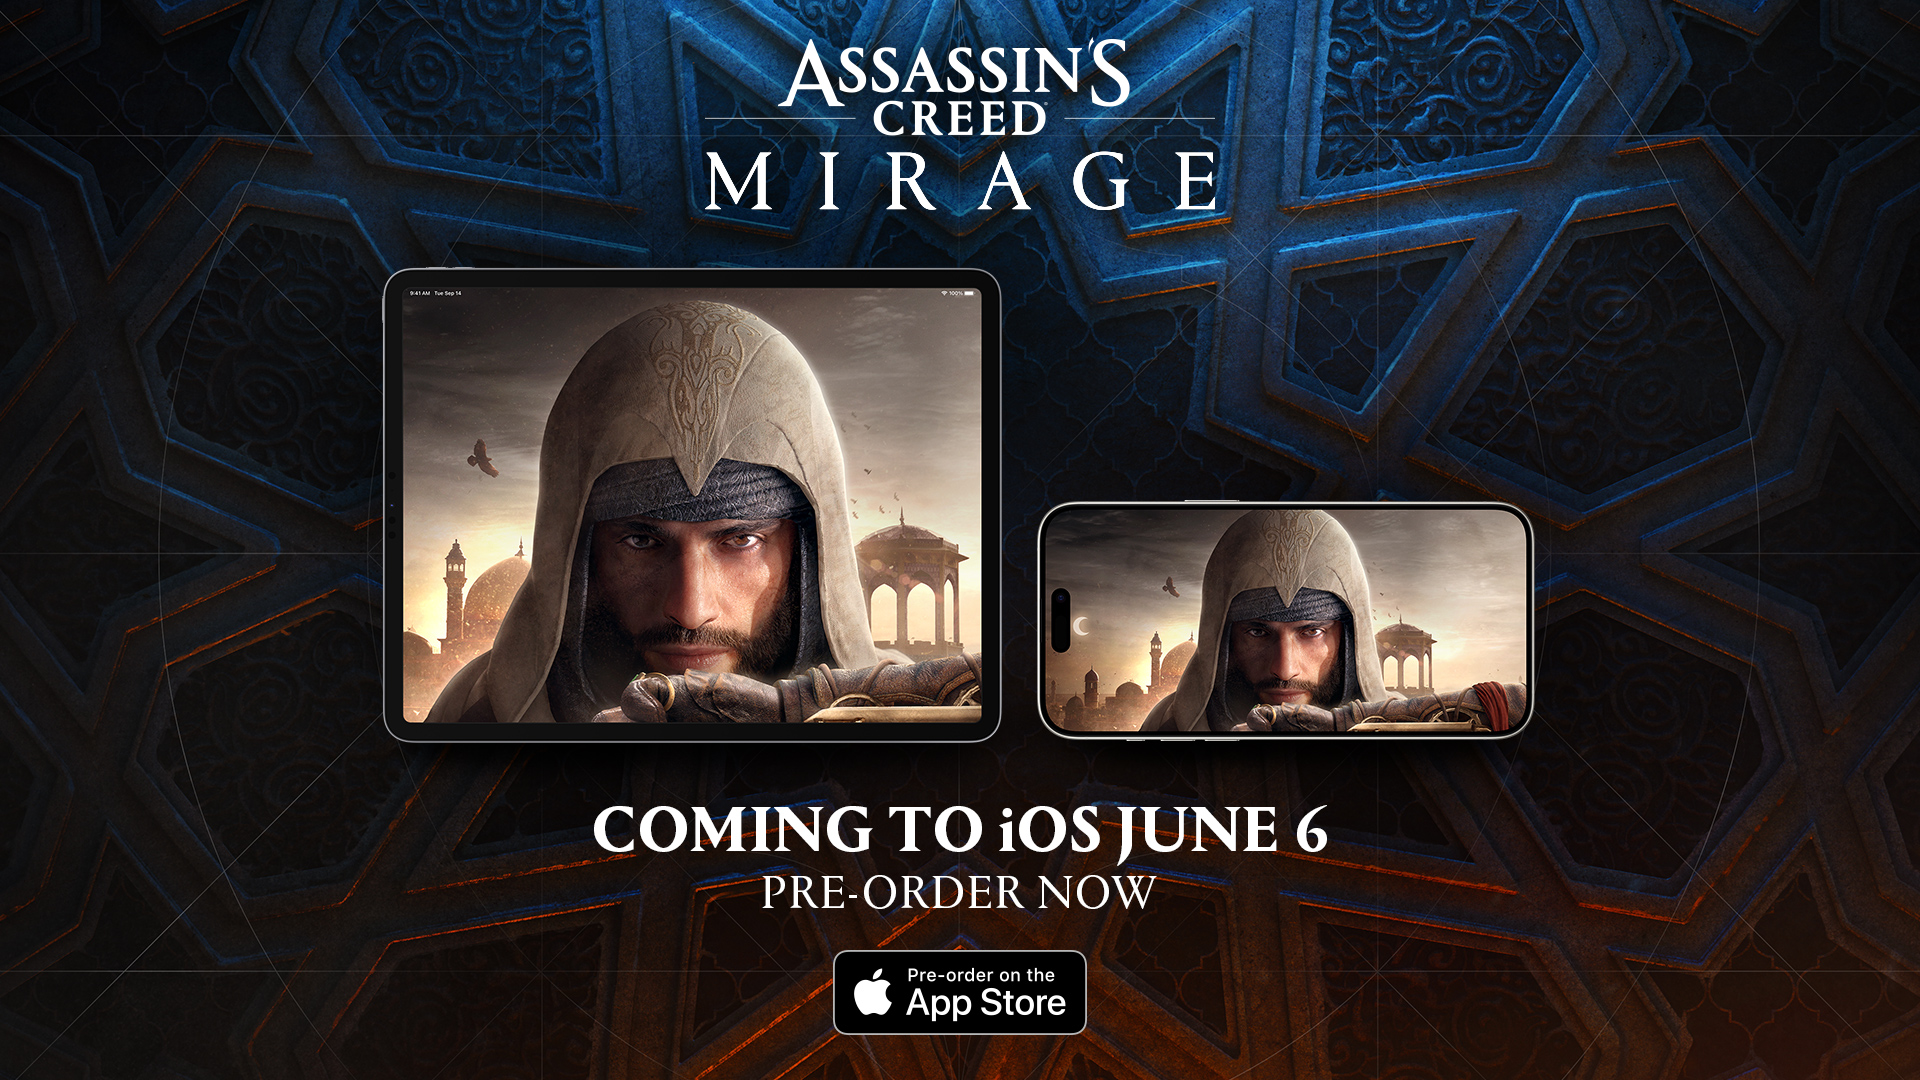 Assassin’s Creed Mirage Launching For iOS Devices On June 6